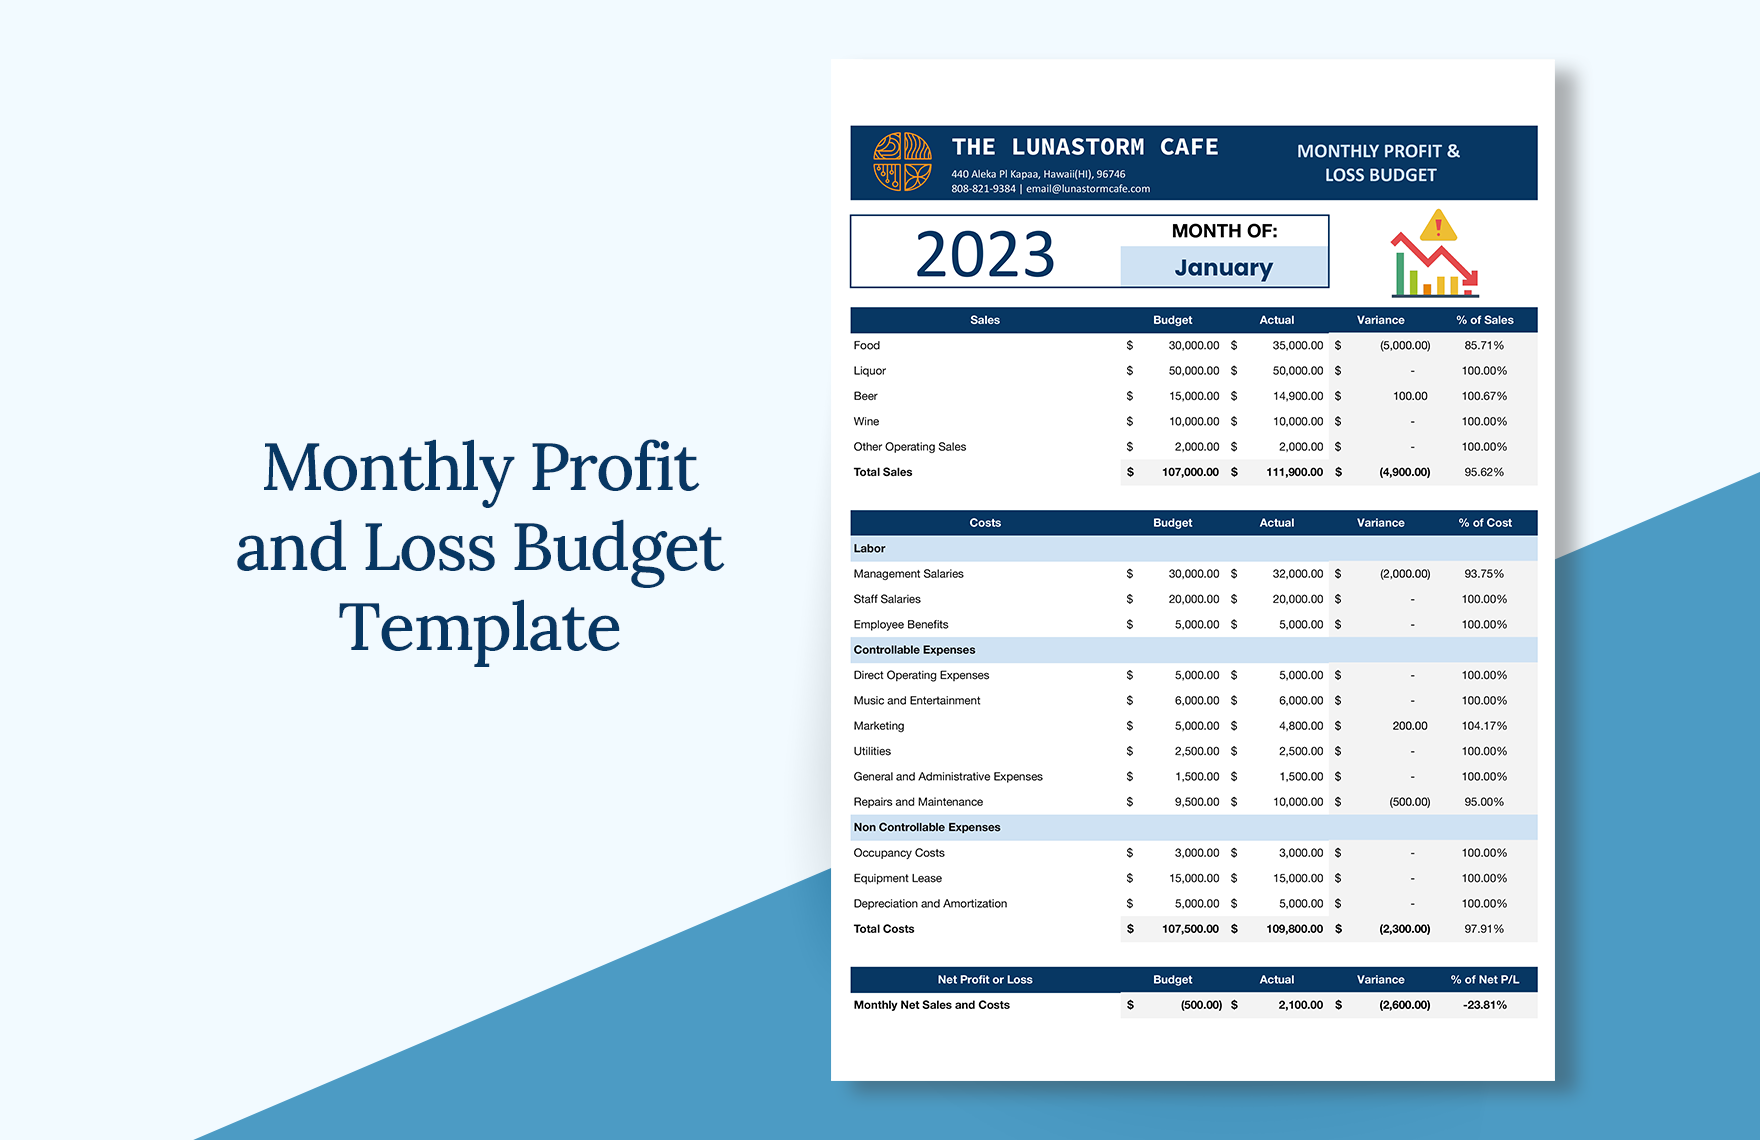 Monthly Profit and Loss Budget Template